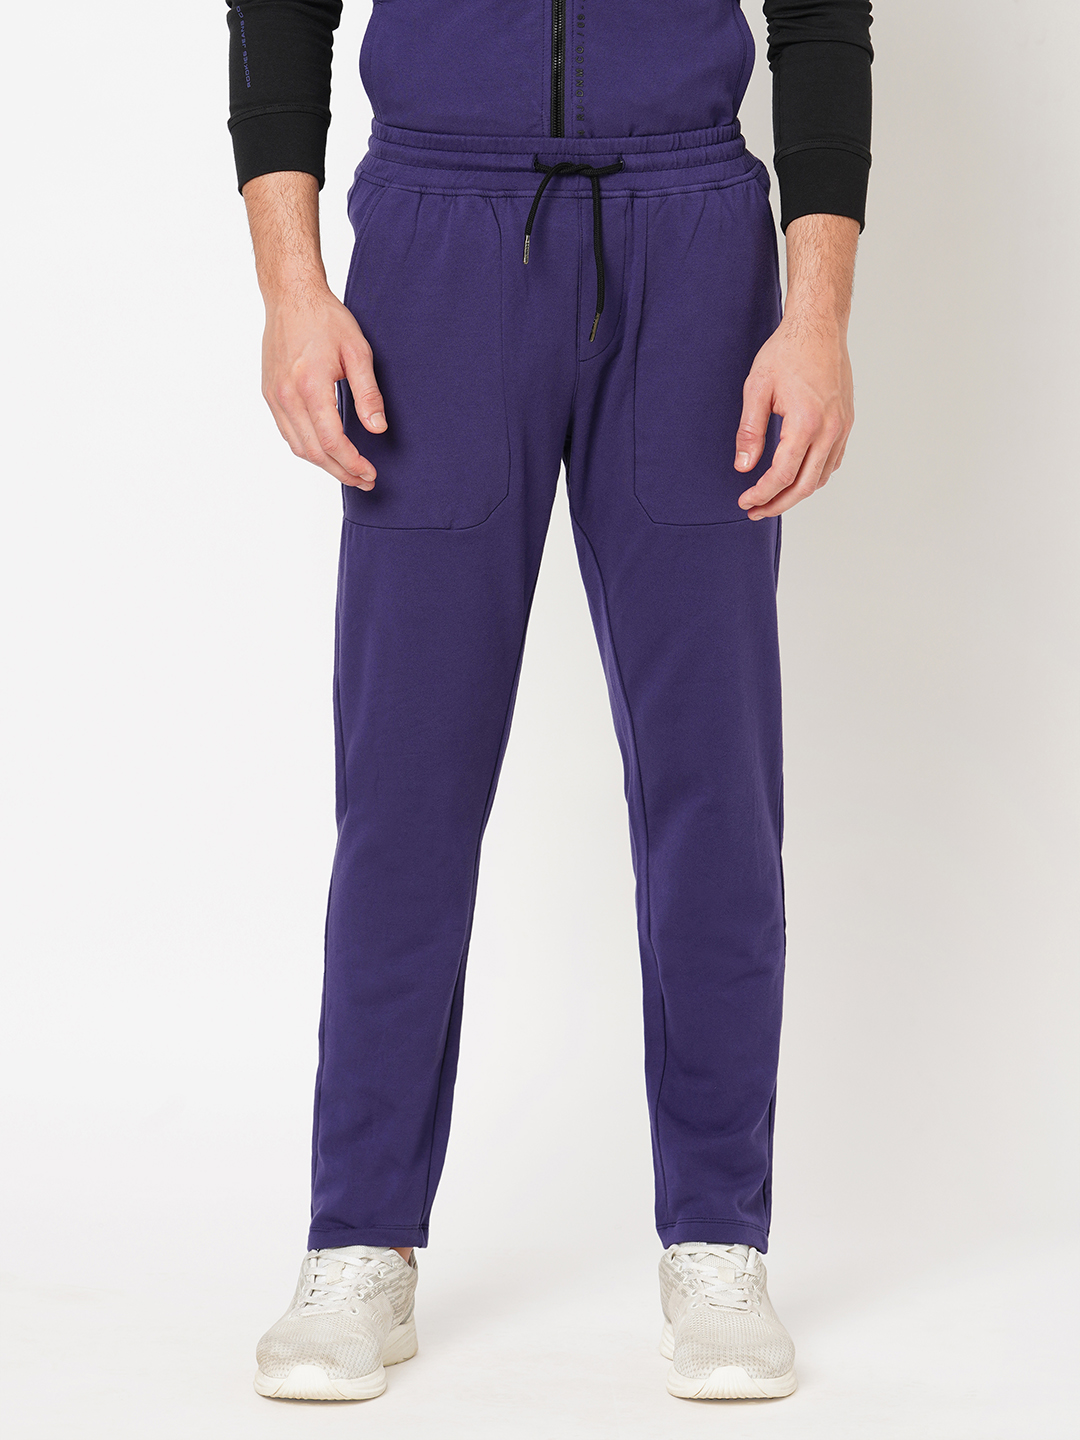 NAVY ATHLEISURE TRACK PANT (COMFORT FIT)